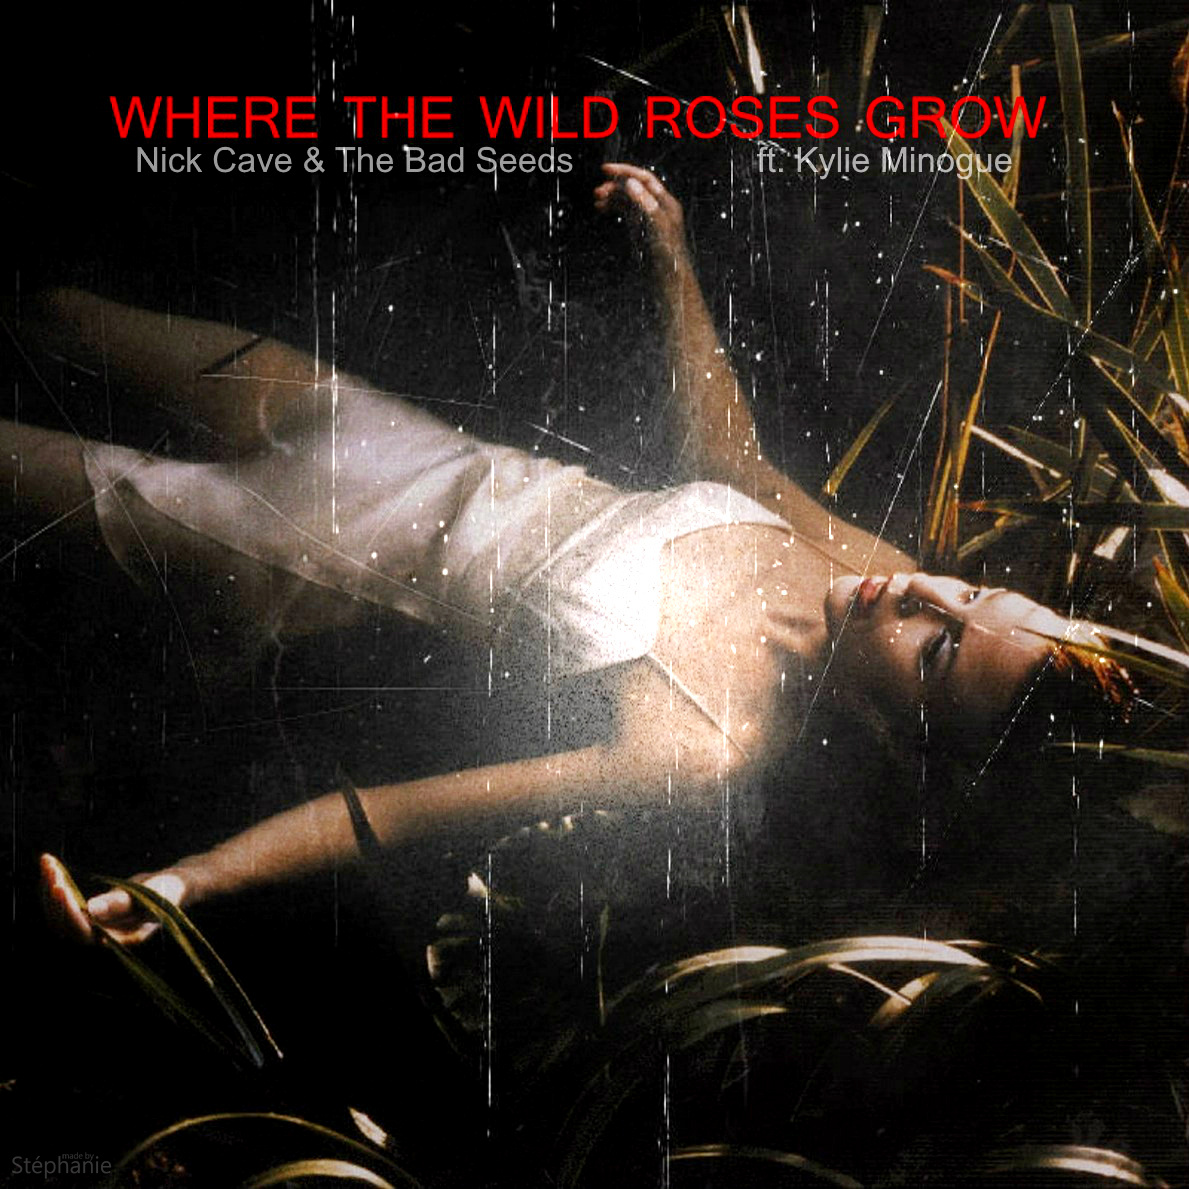 Nick cave wild roses. Where the Wild Roses grow Nick Cave and the Bad Seeds. Nick Cave Kylie Minogue where the Wild Roses grow.